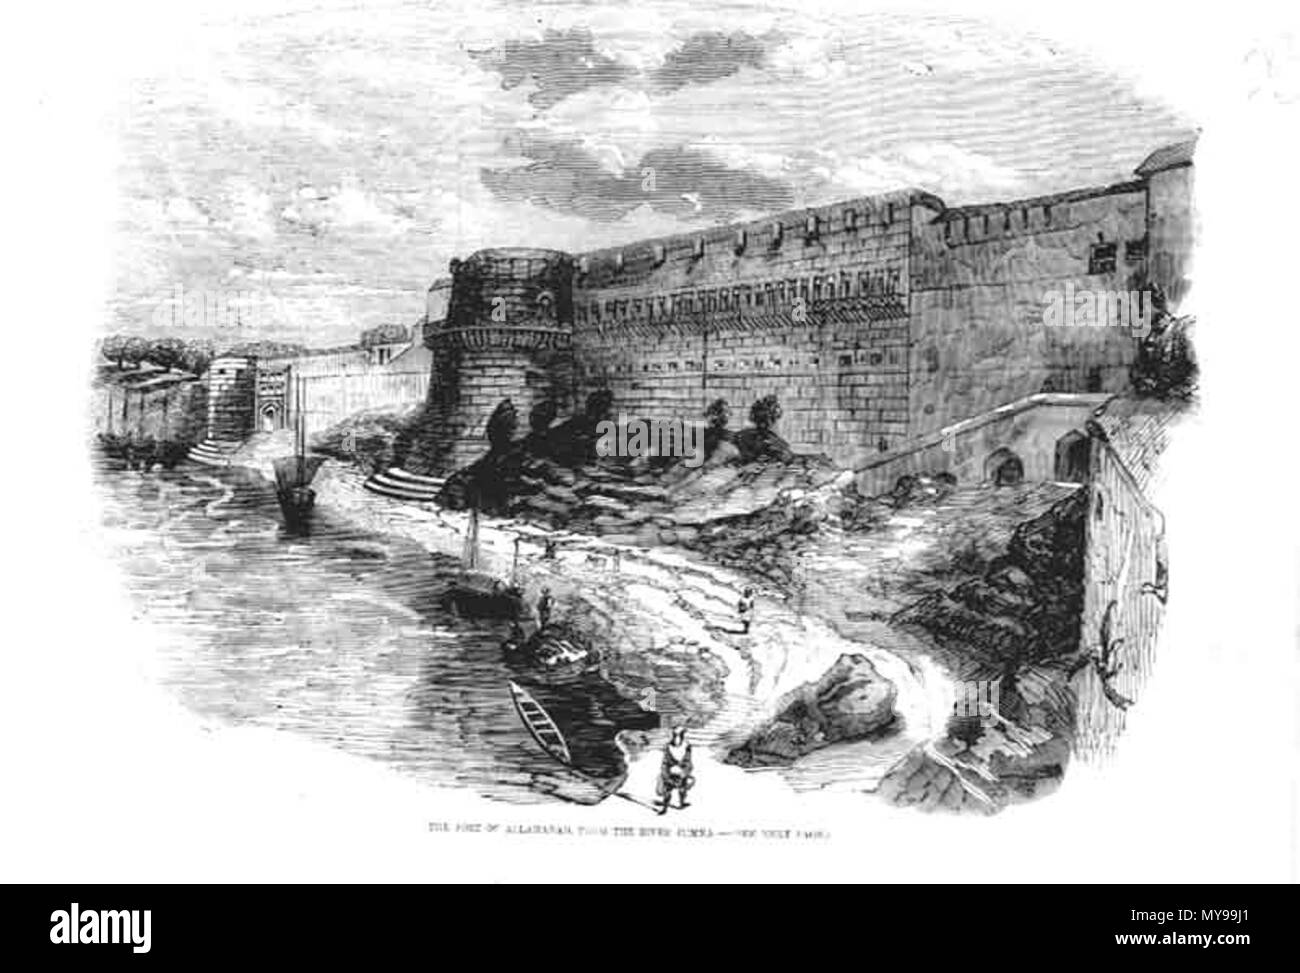 . English: Fort of Allahabad'*, 1857. Views from the ILLUSTRATED LONDON NEWS and The Graphic (some with later hand coloring, all from ebay auctions): 'Fort of Allahabad'*, 1857  . between 1846 and 1899. Views from the ILLUSTRATED LONDON NEWS and The Graphic (some with later hand coloring, all from ebay auctions): 34 Allahabadfort Stock Photo